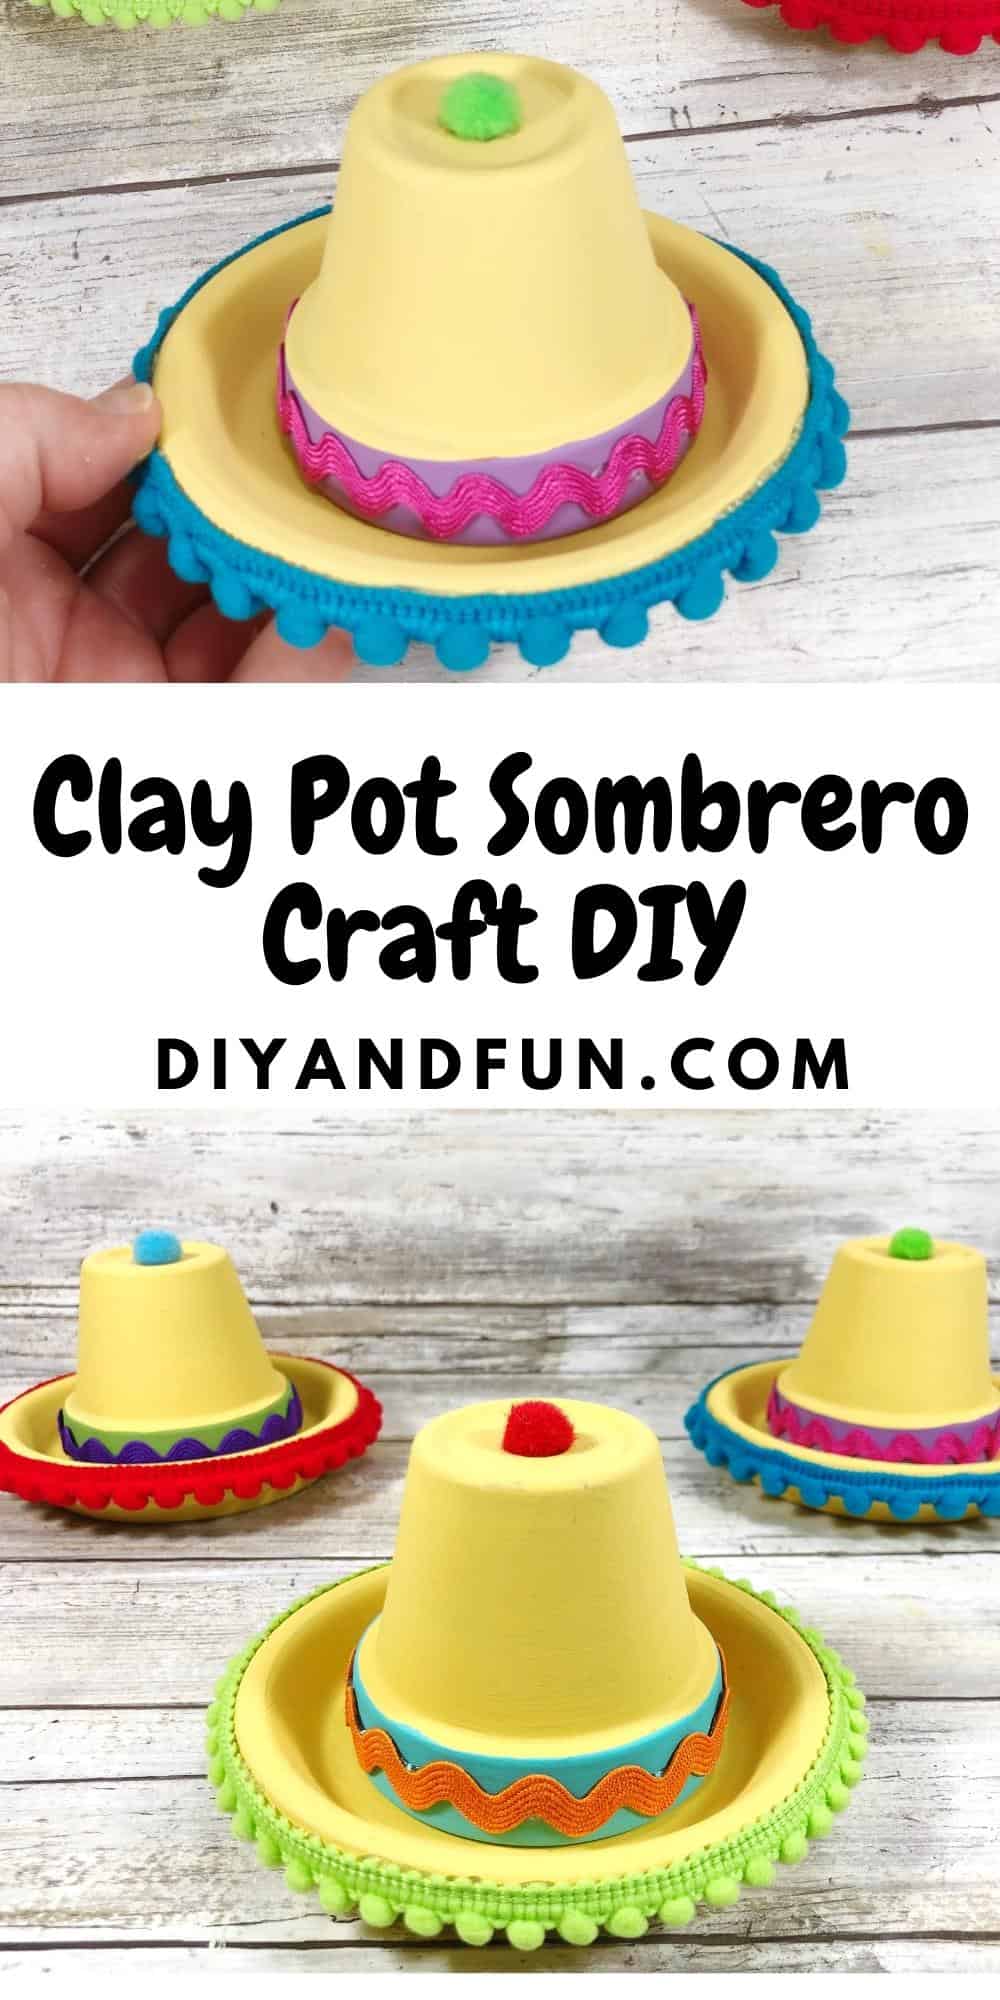 Clay Pot Sombrero Craft DIY, a simple homemade project for turning a terracotta clay pot into a hat for decor or garden use.